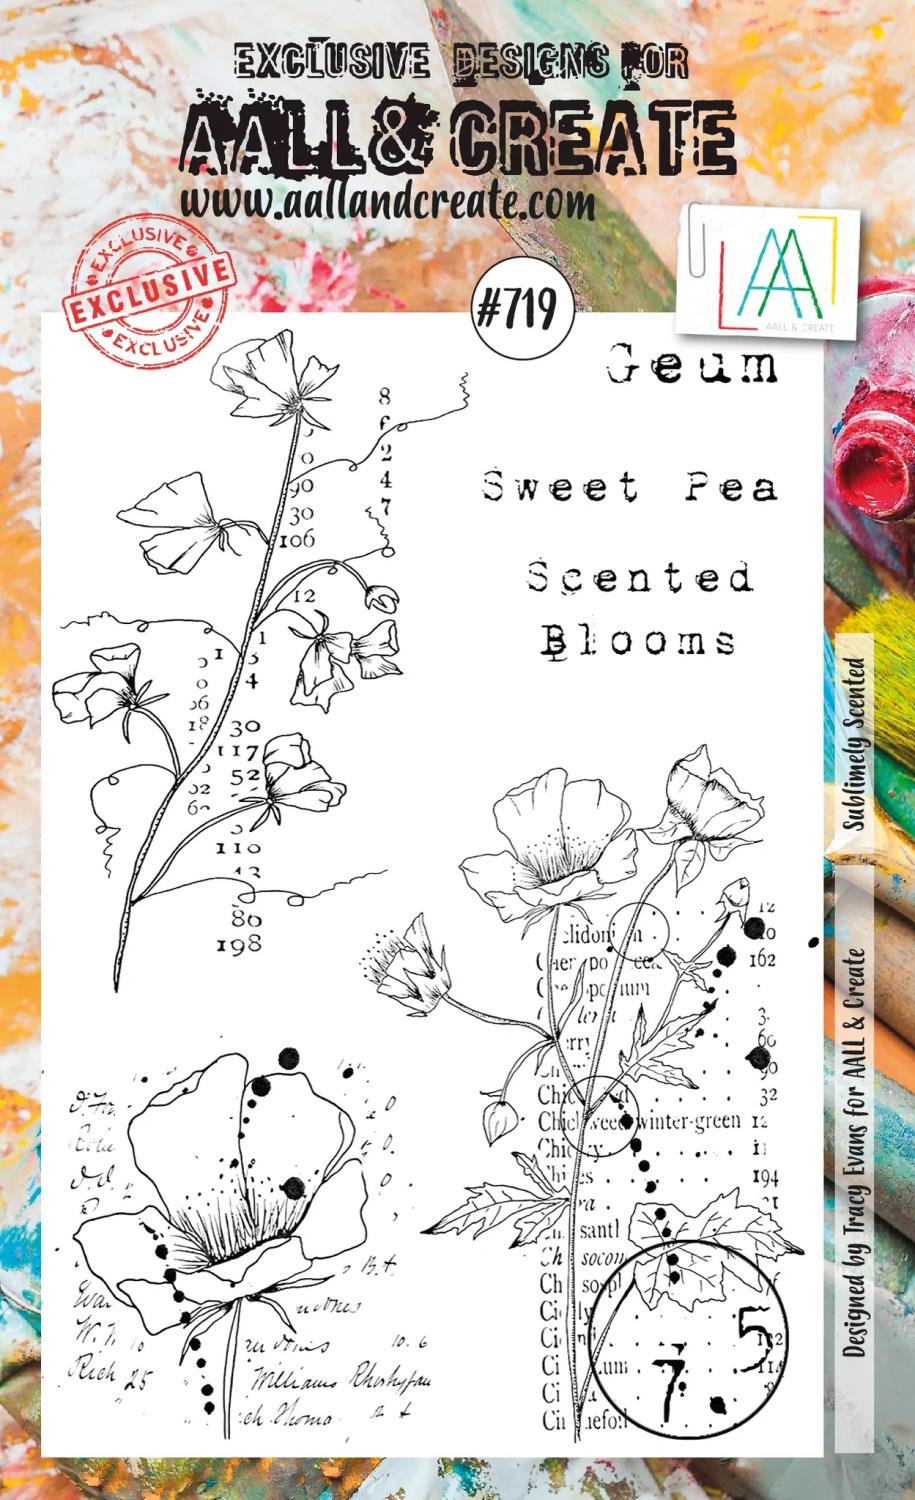 AAll&create - A6 STAMPS  - #719 - Sublimely Scented